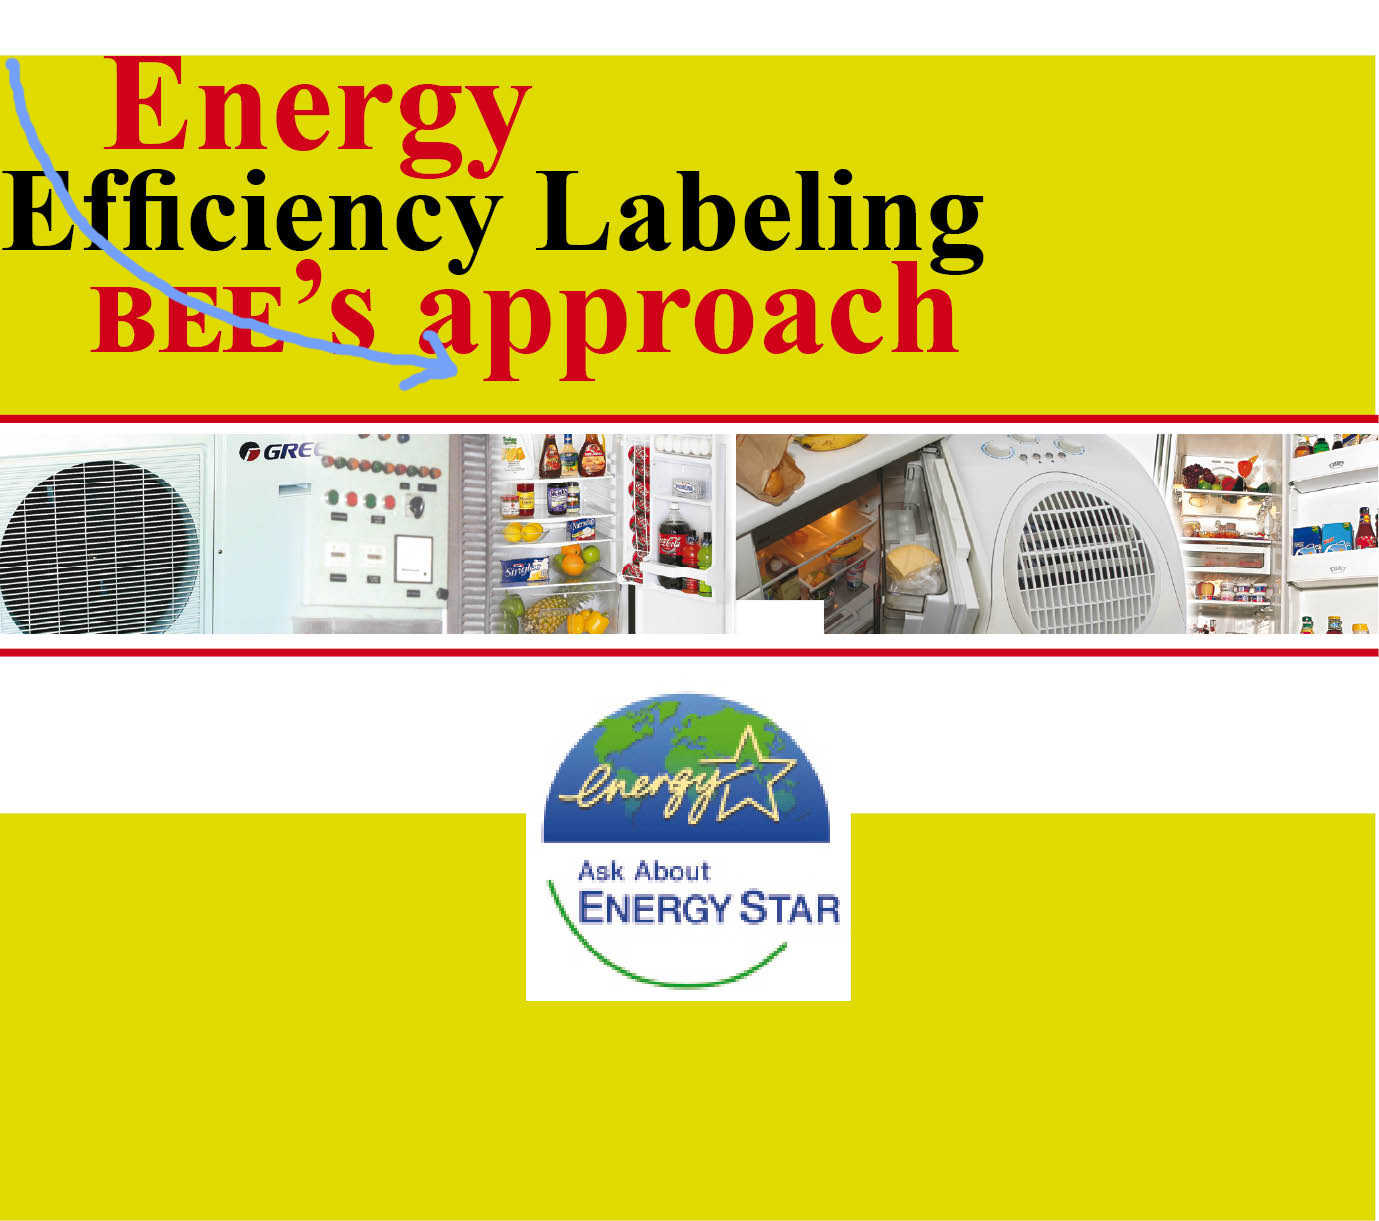 Energy Efficiency Labeling bee’s approach